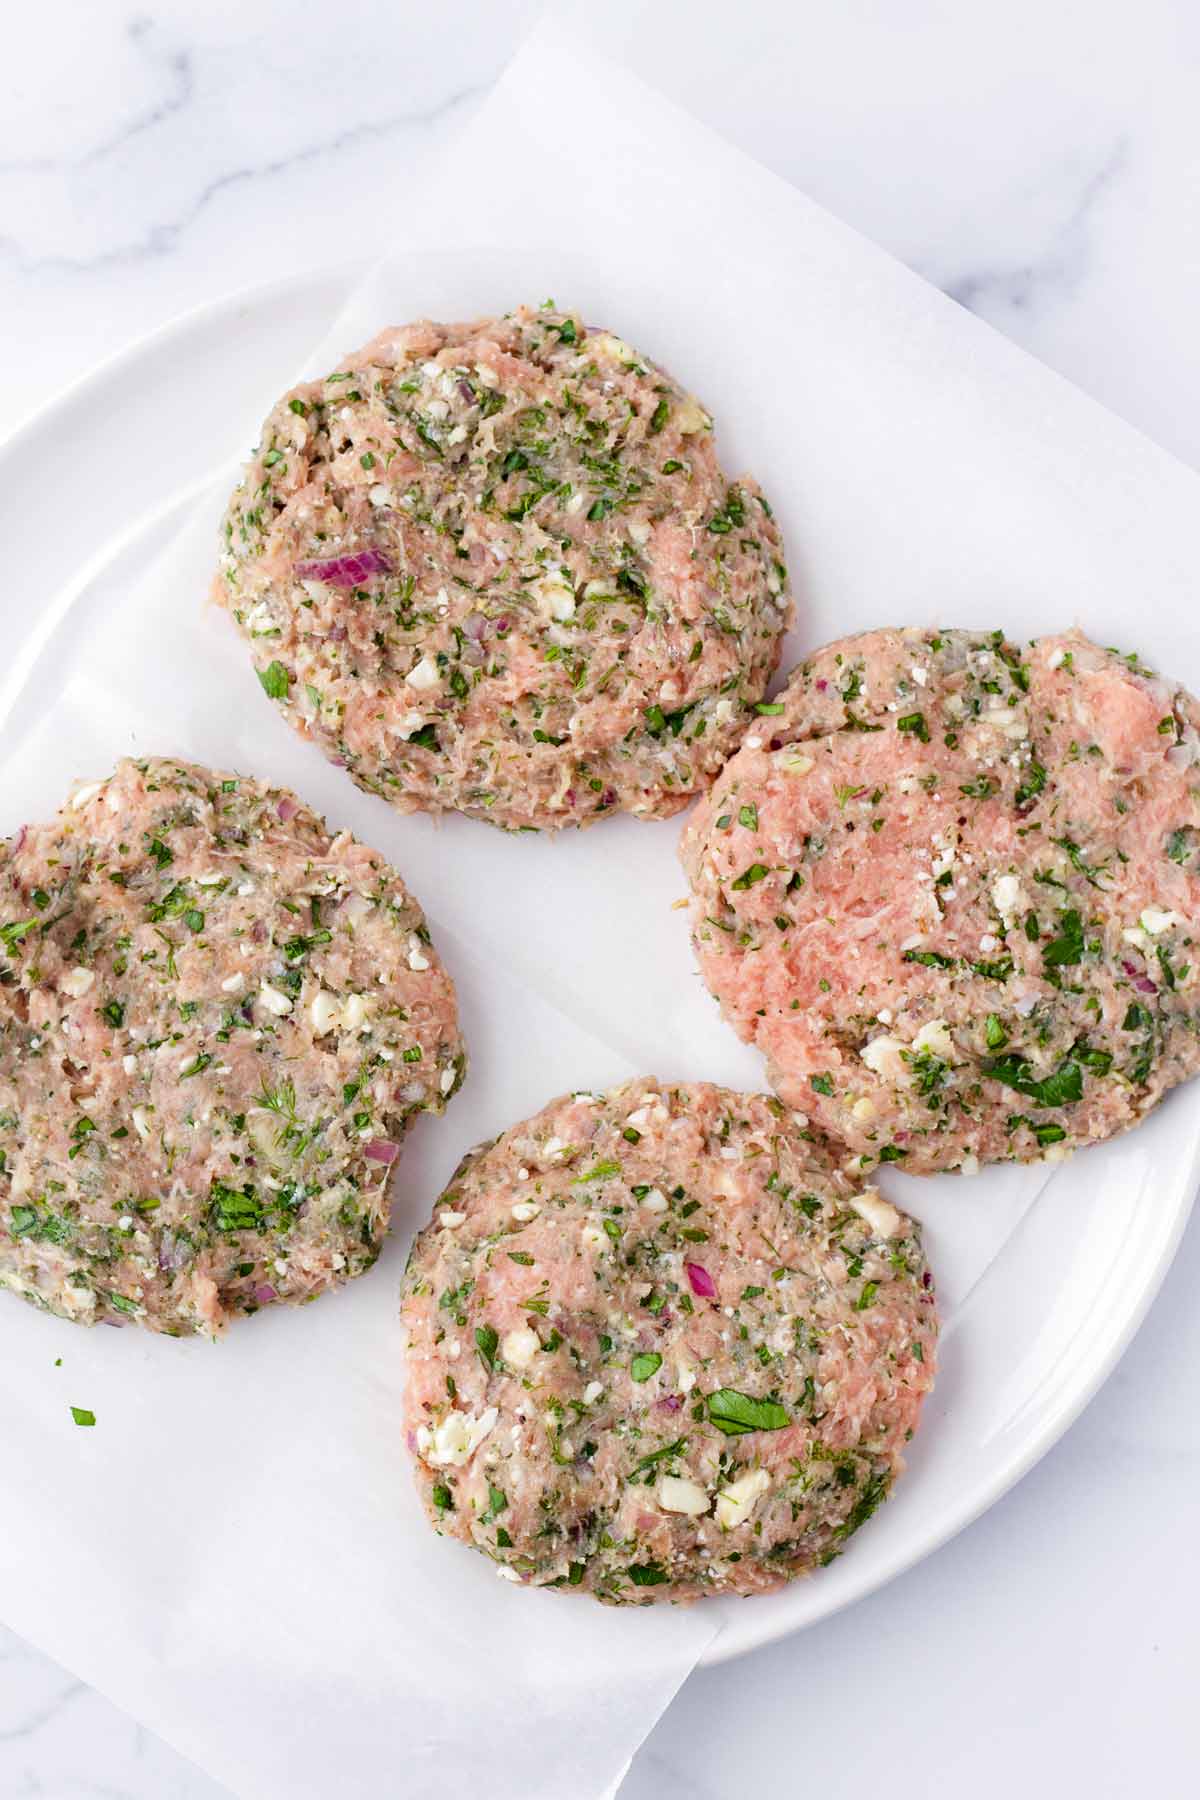 four uncooked turkey and feta burger patties on plate